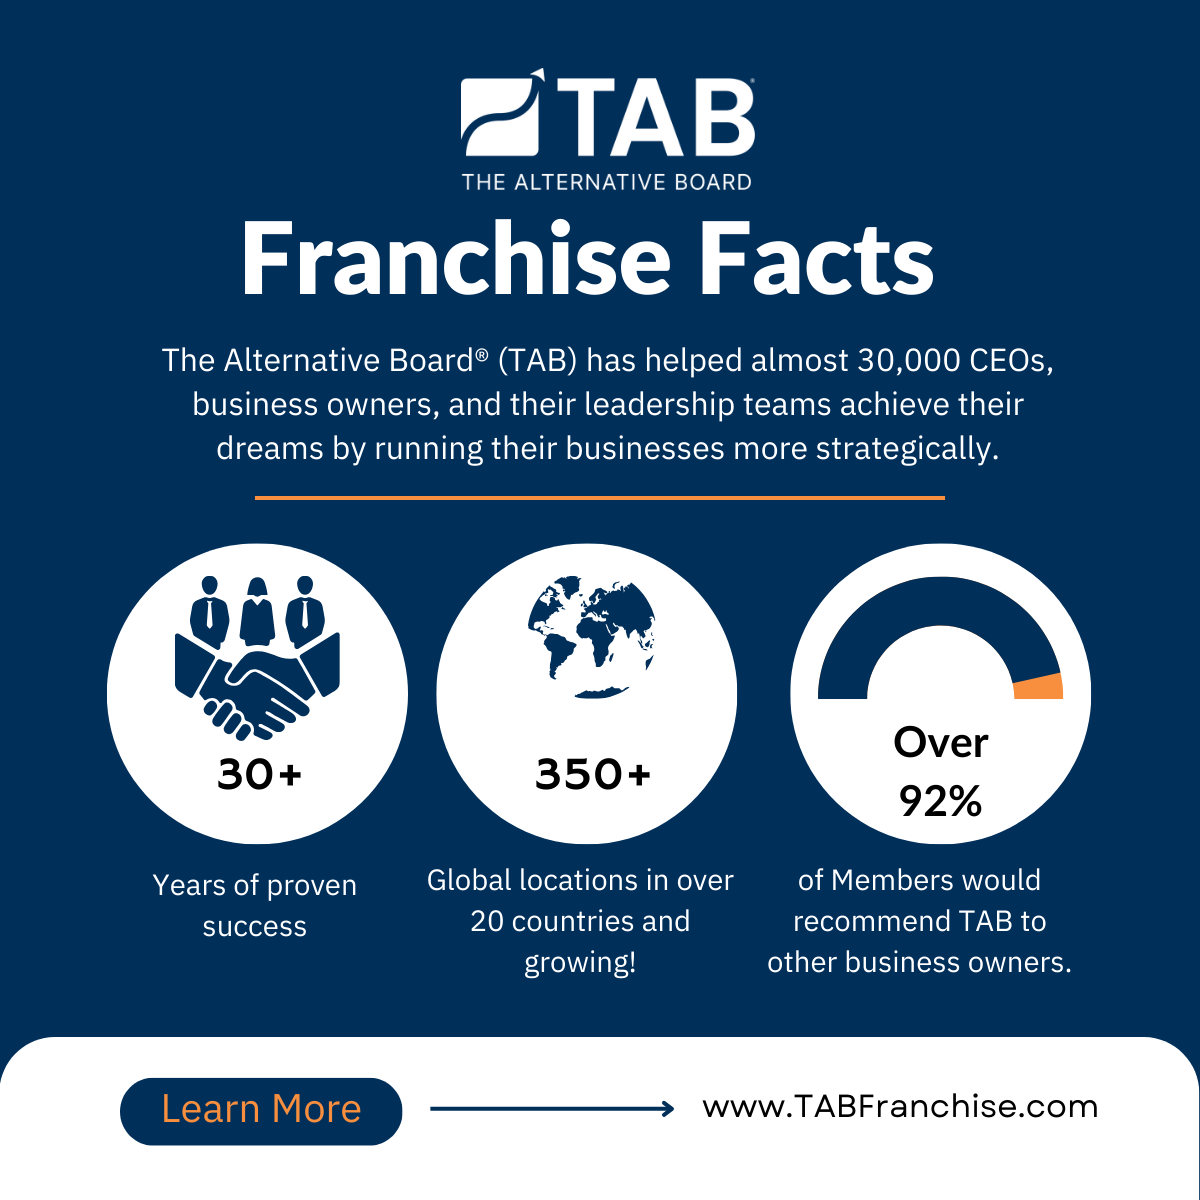 TAB Franchise Facts